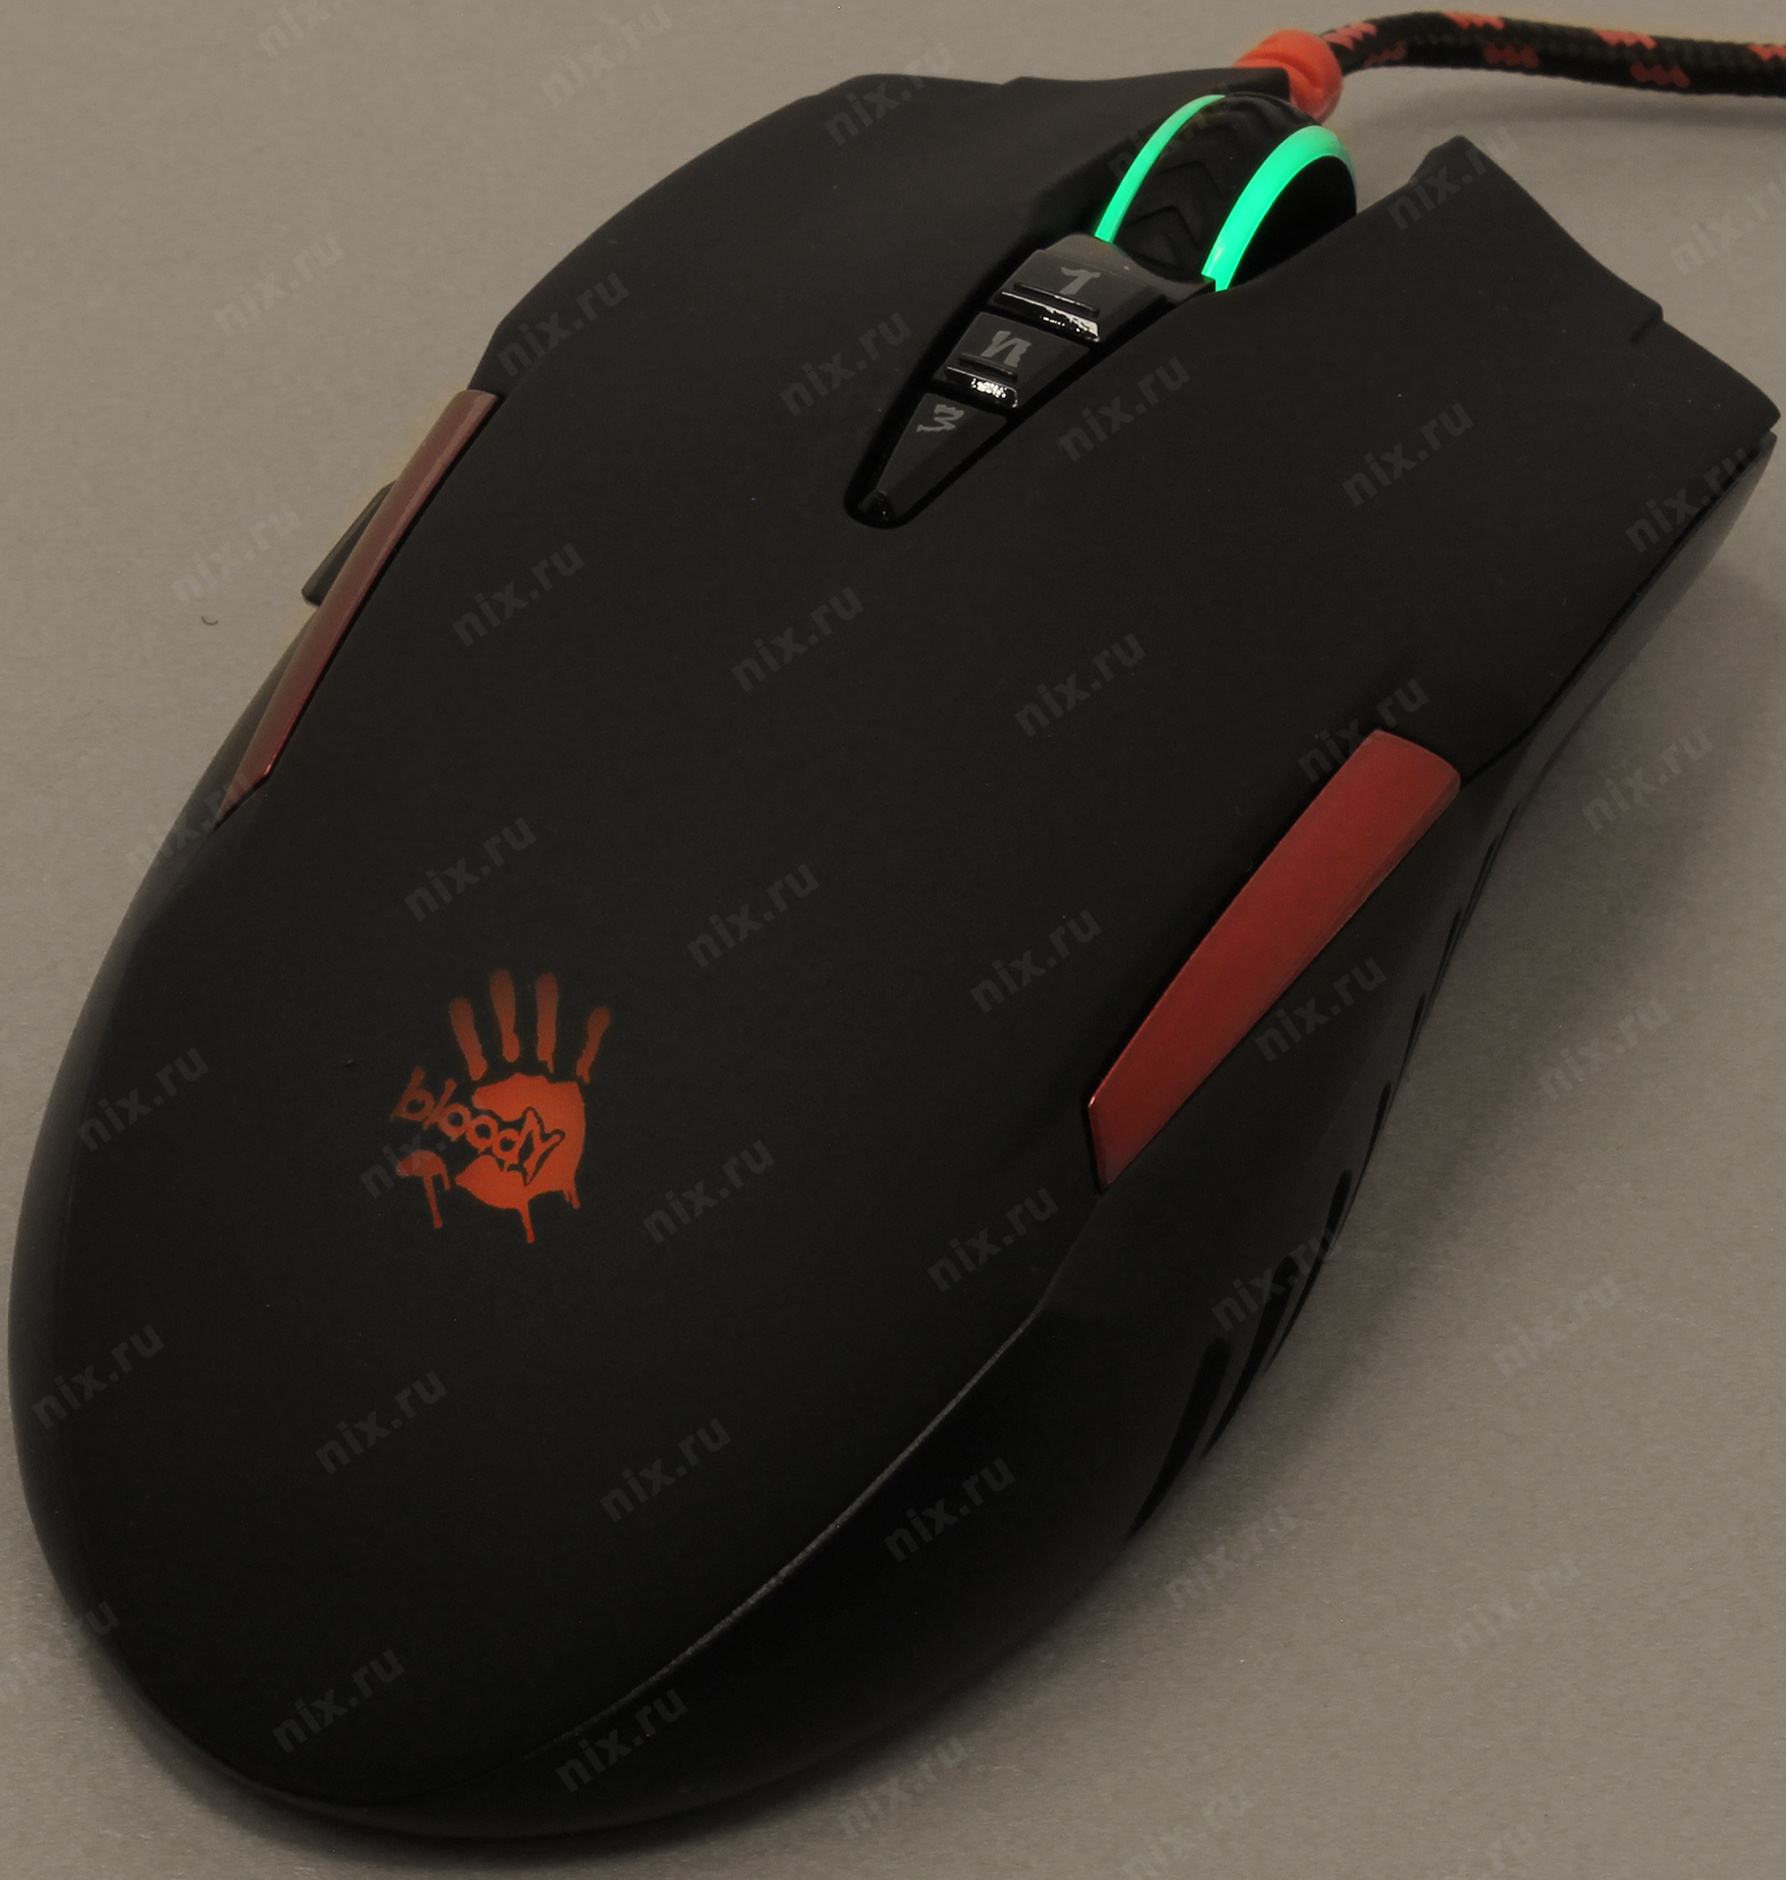 Bloody mouse a4tech rust обход фото 68